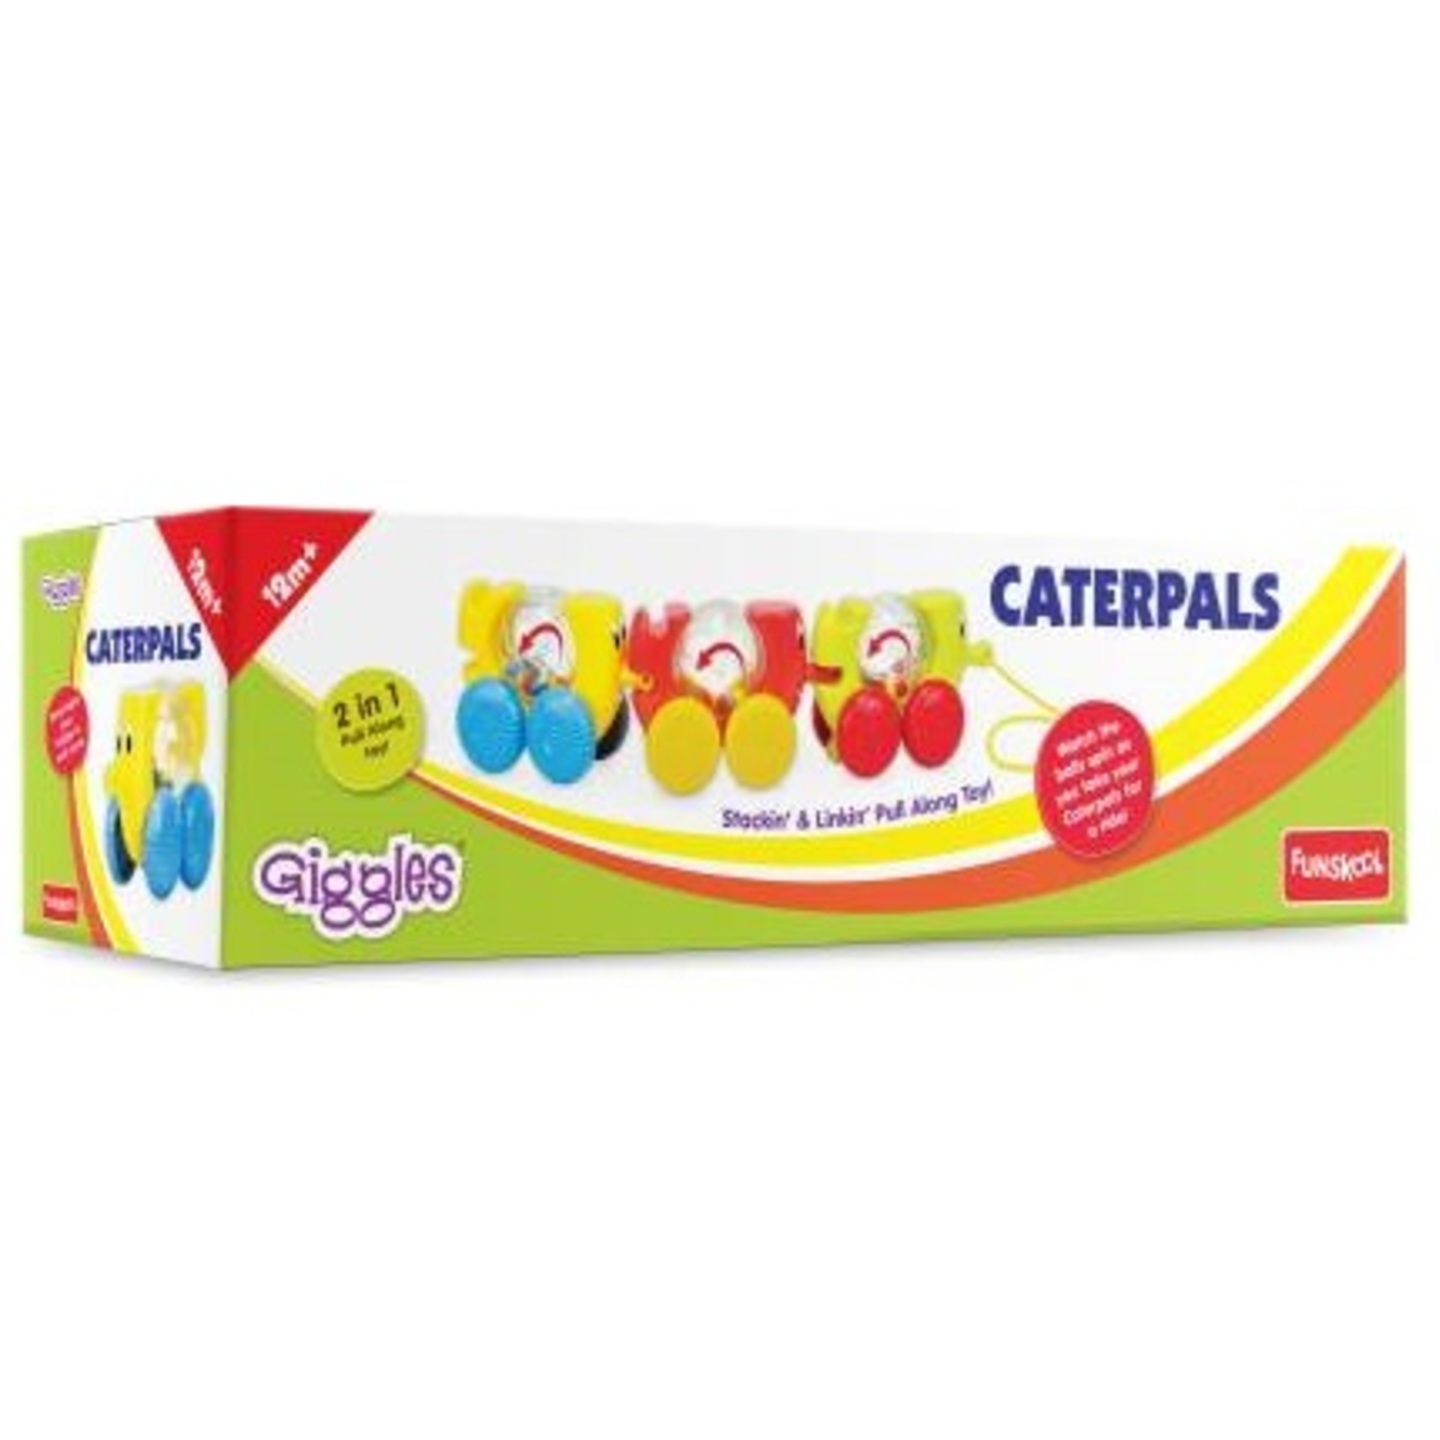 Funskool Caterpal Pack of 3